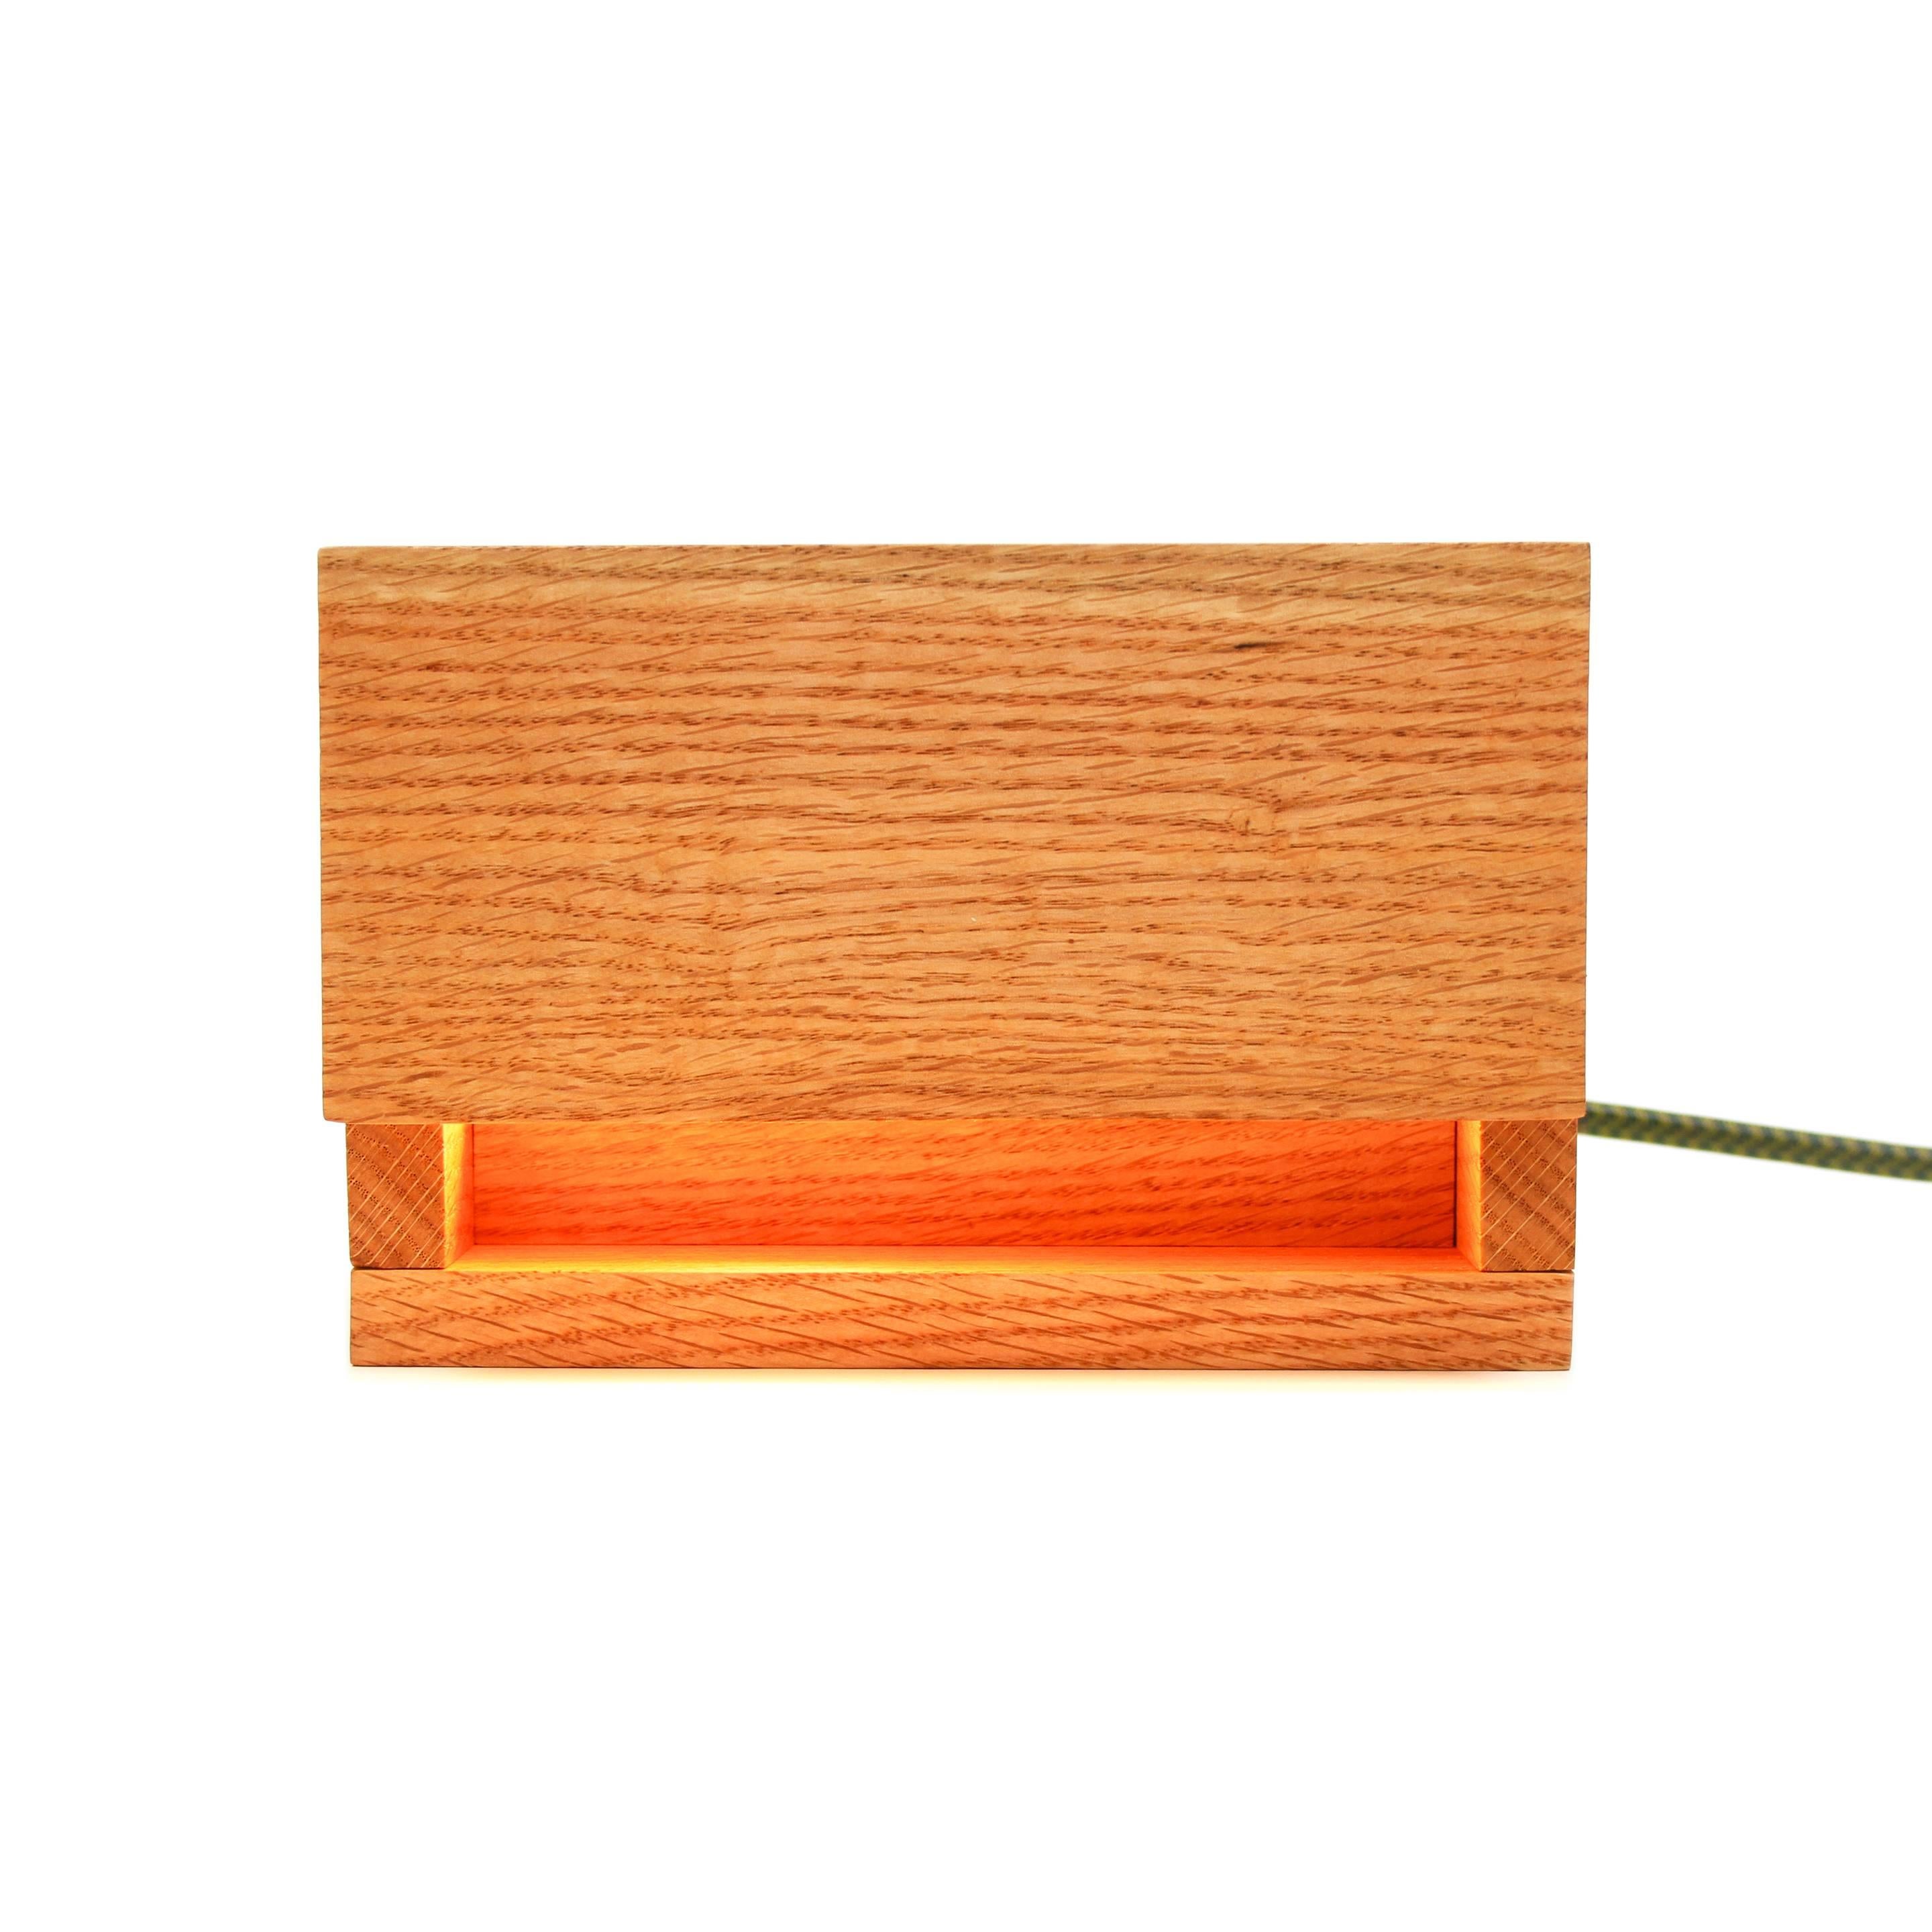 Oiled Small Table Lamp in Solid Red Oak with Cloth Covered Cord and Toggle Switch